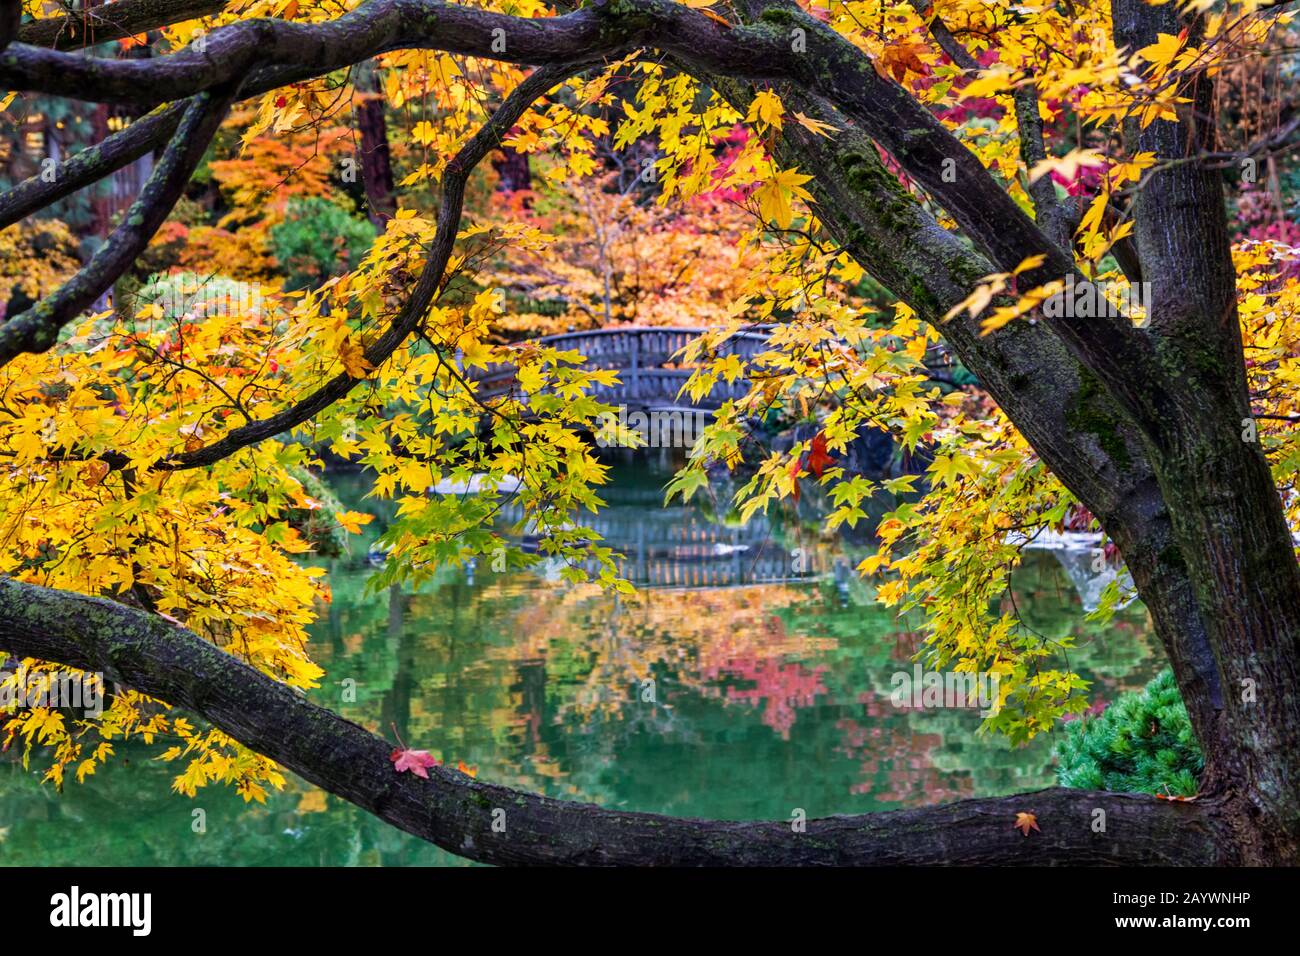 Looking Through Colorful Fall Leaves In The Nishinomiya Japanese